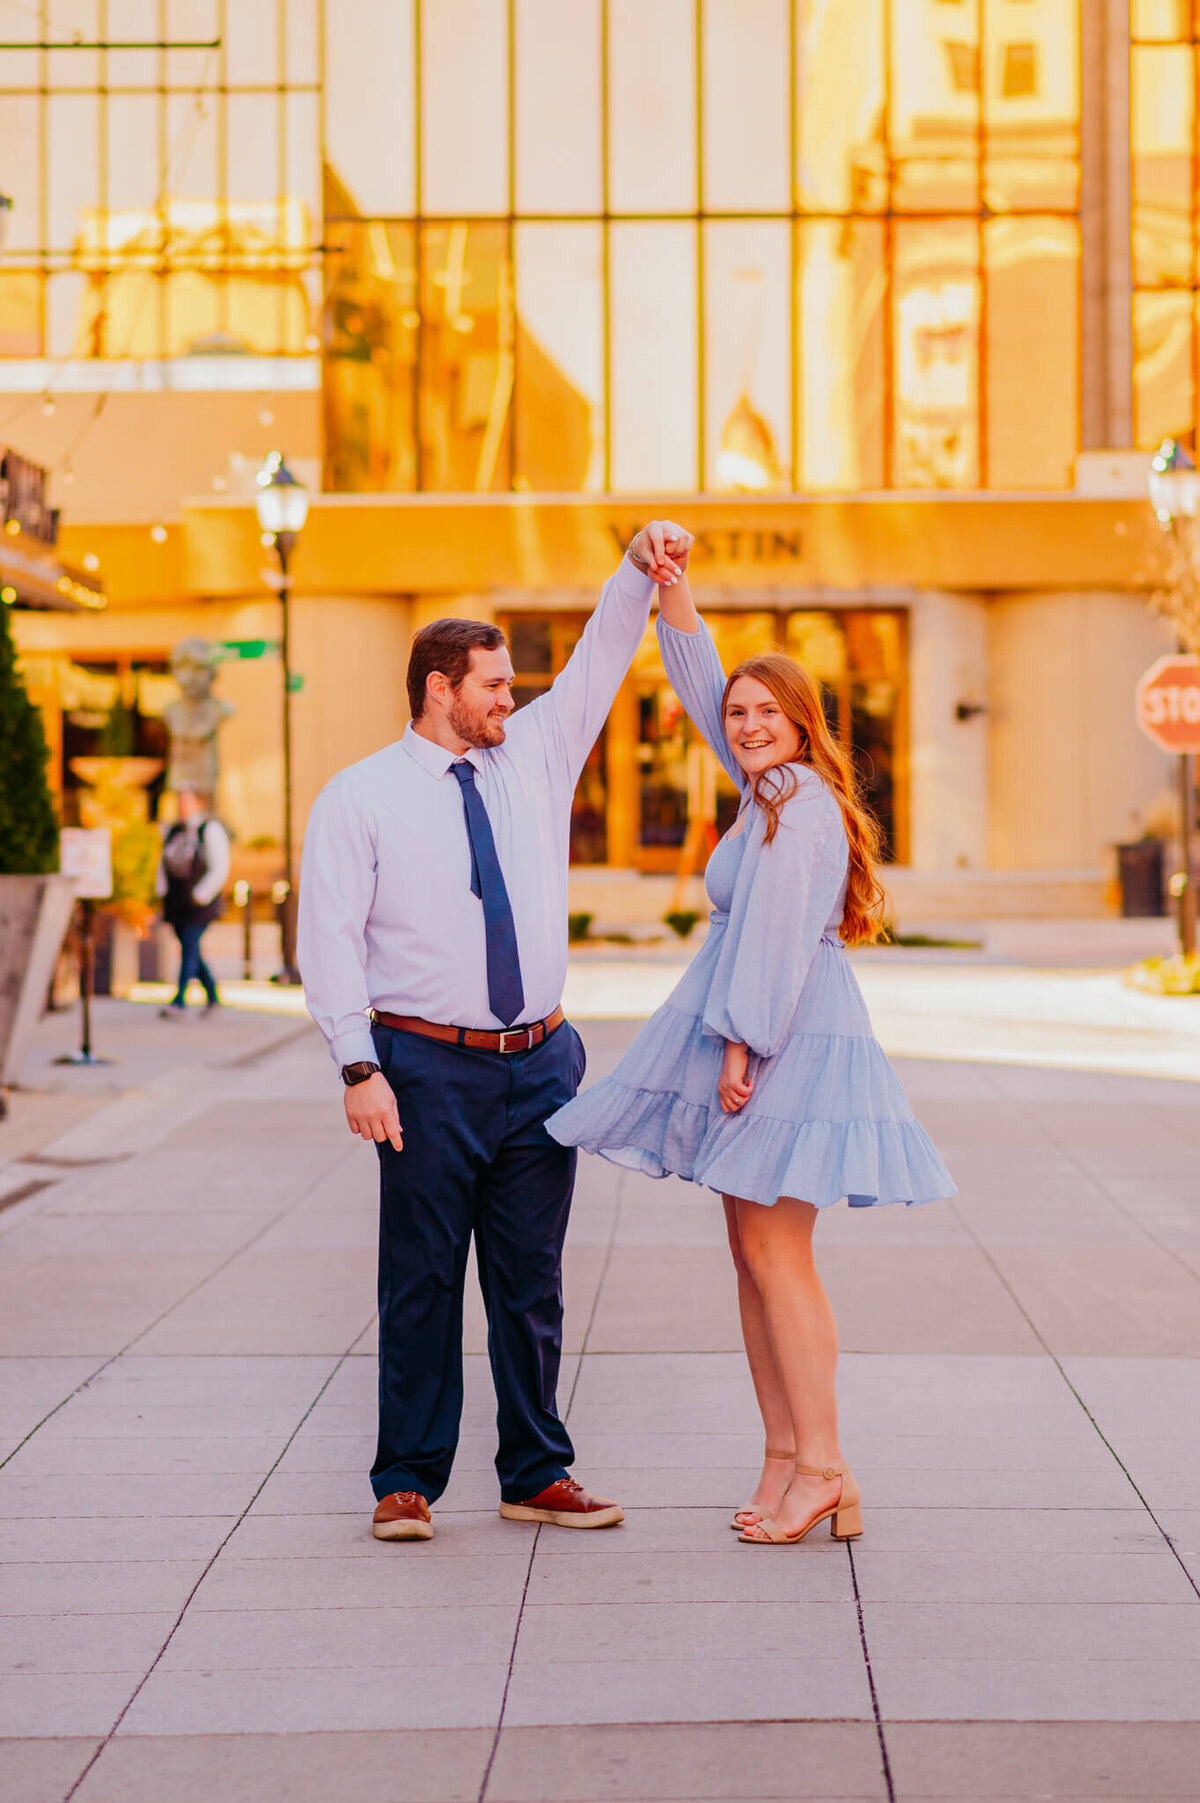 photo of a woman spinning with her fiance in front of a fancy hotel